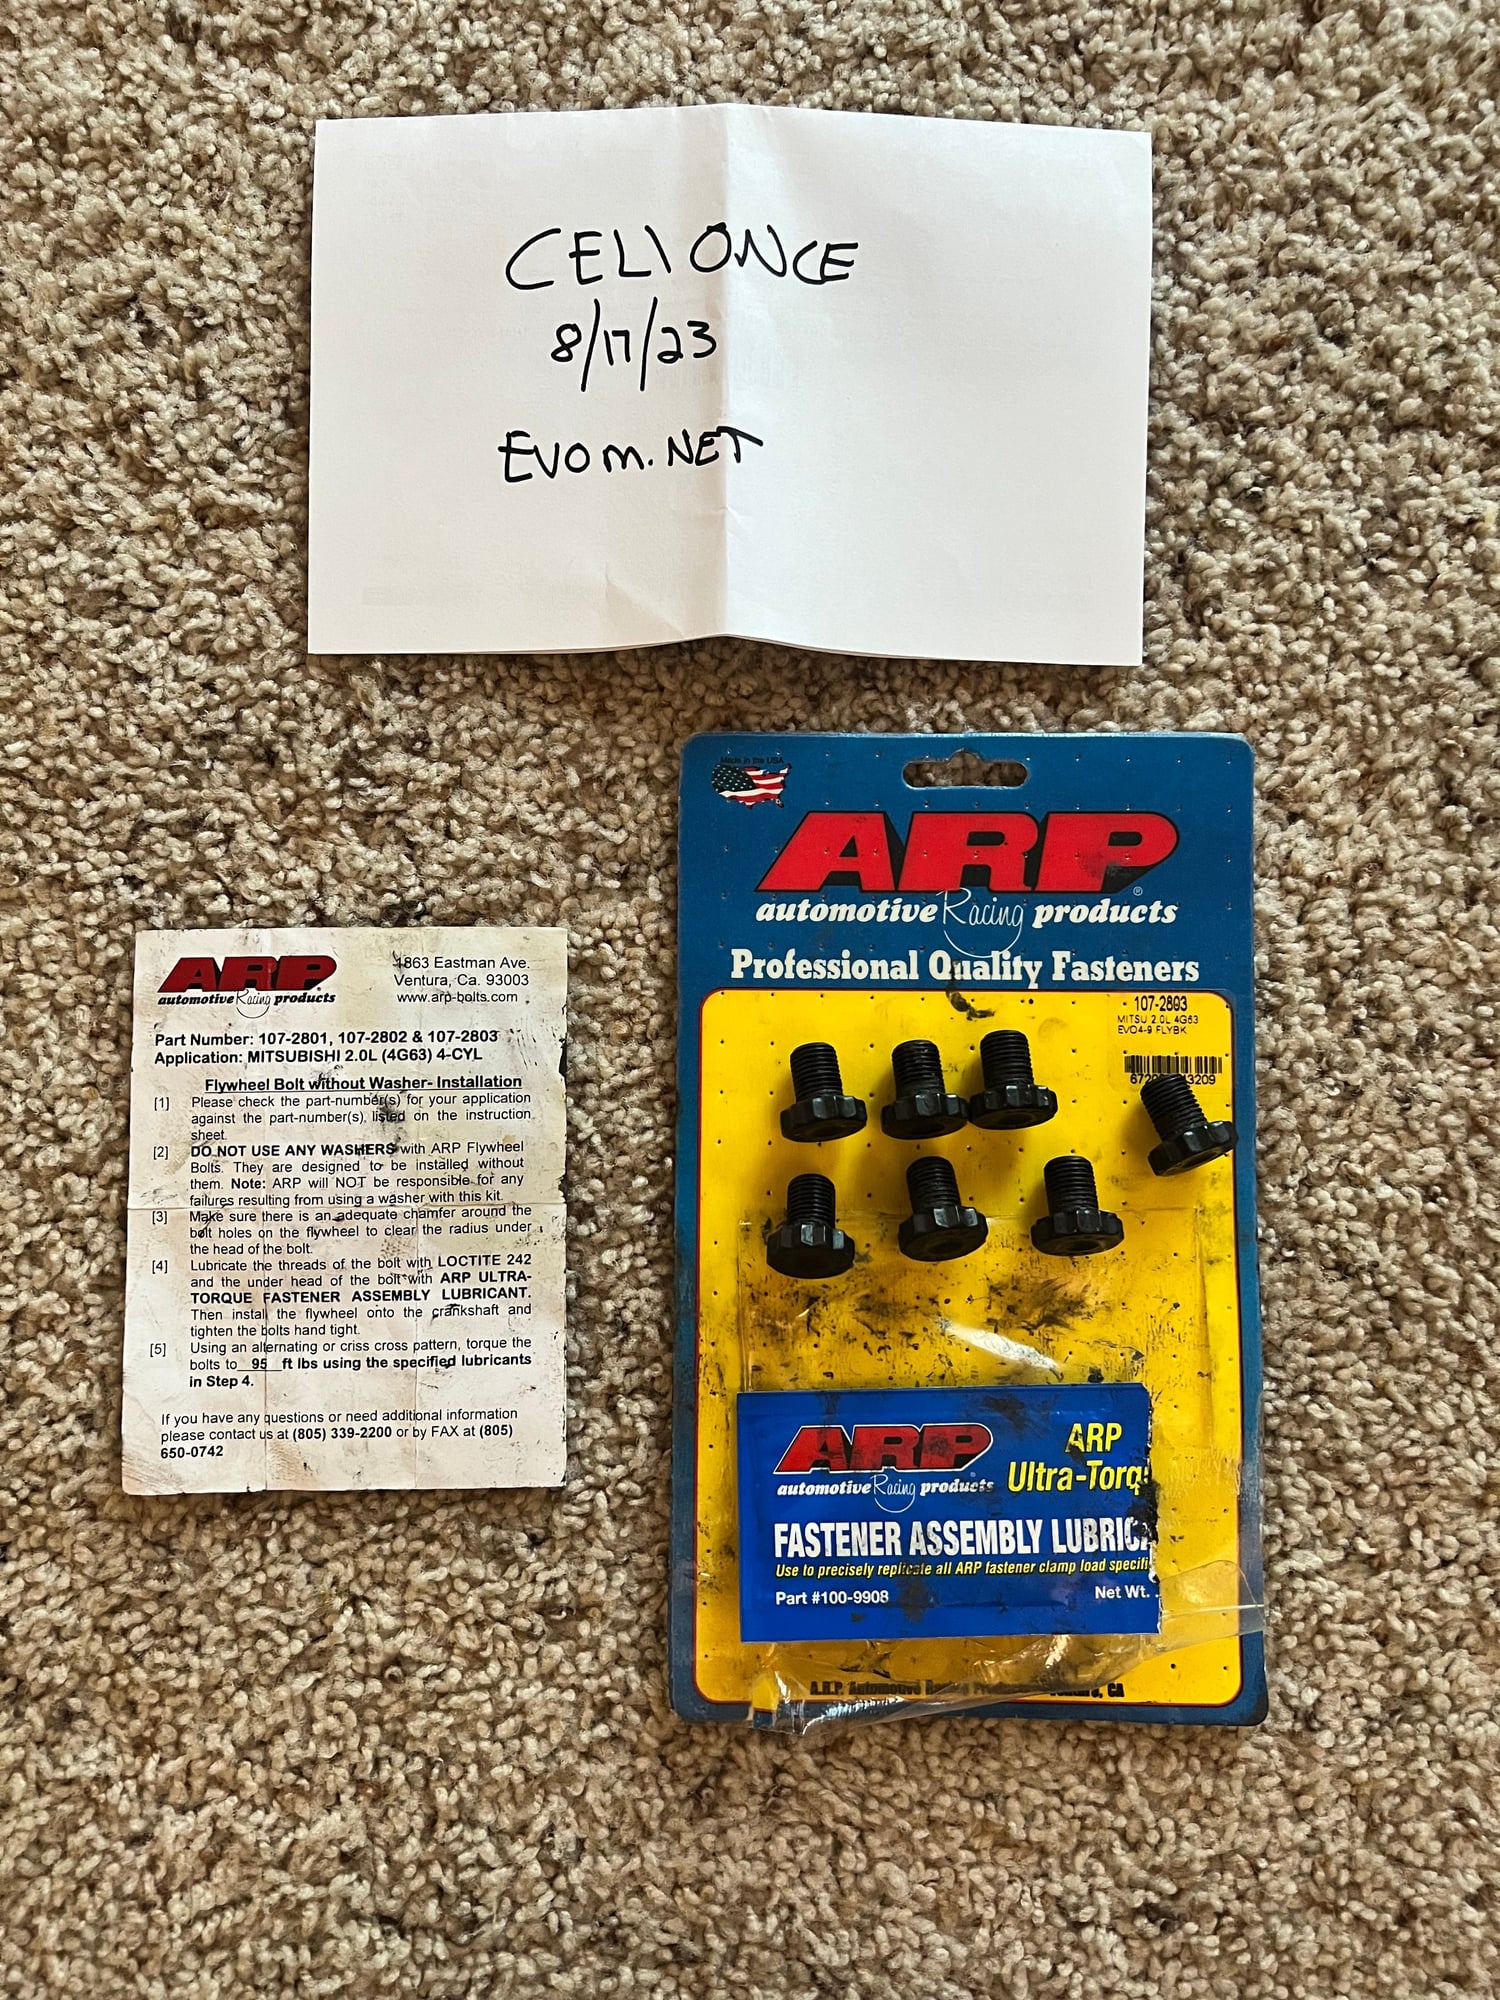 Drivetrain - ARP Flywheel Bolts for Evo 4-9 (Unused, obviously) - New - Seattle, WA 98101, United States